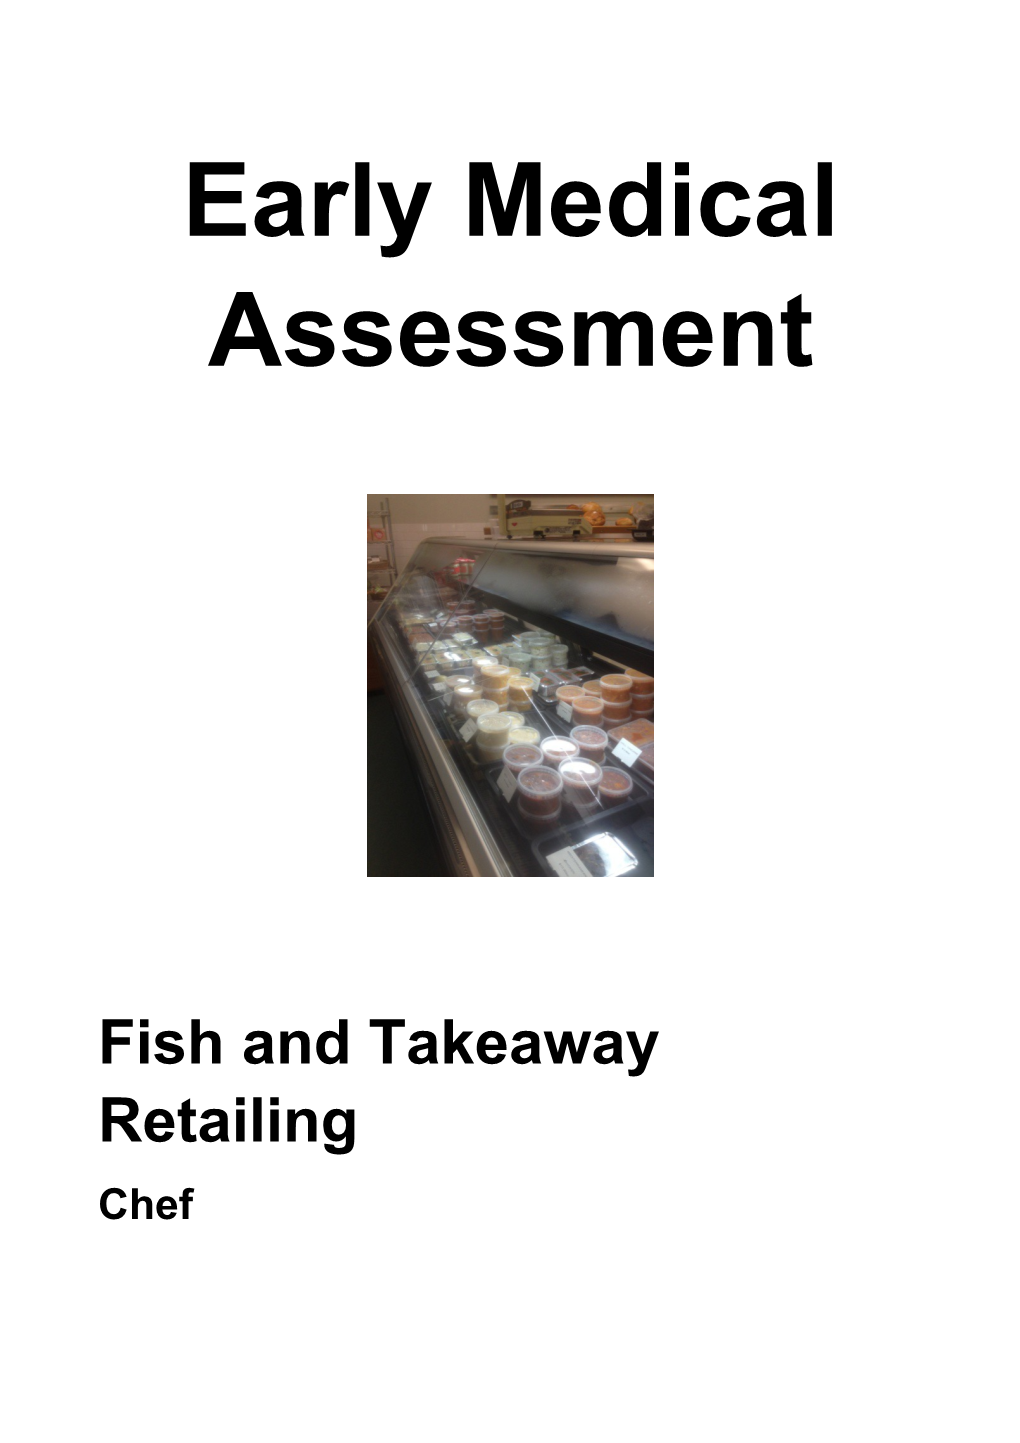 Fish and Takeaway Retailing - Chef